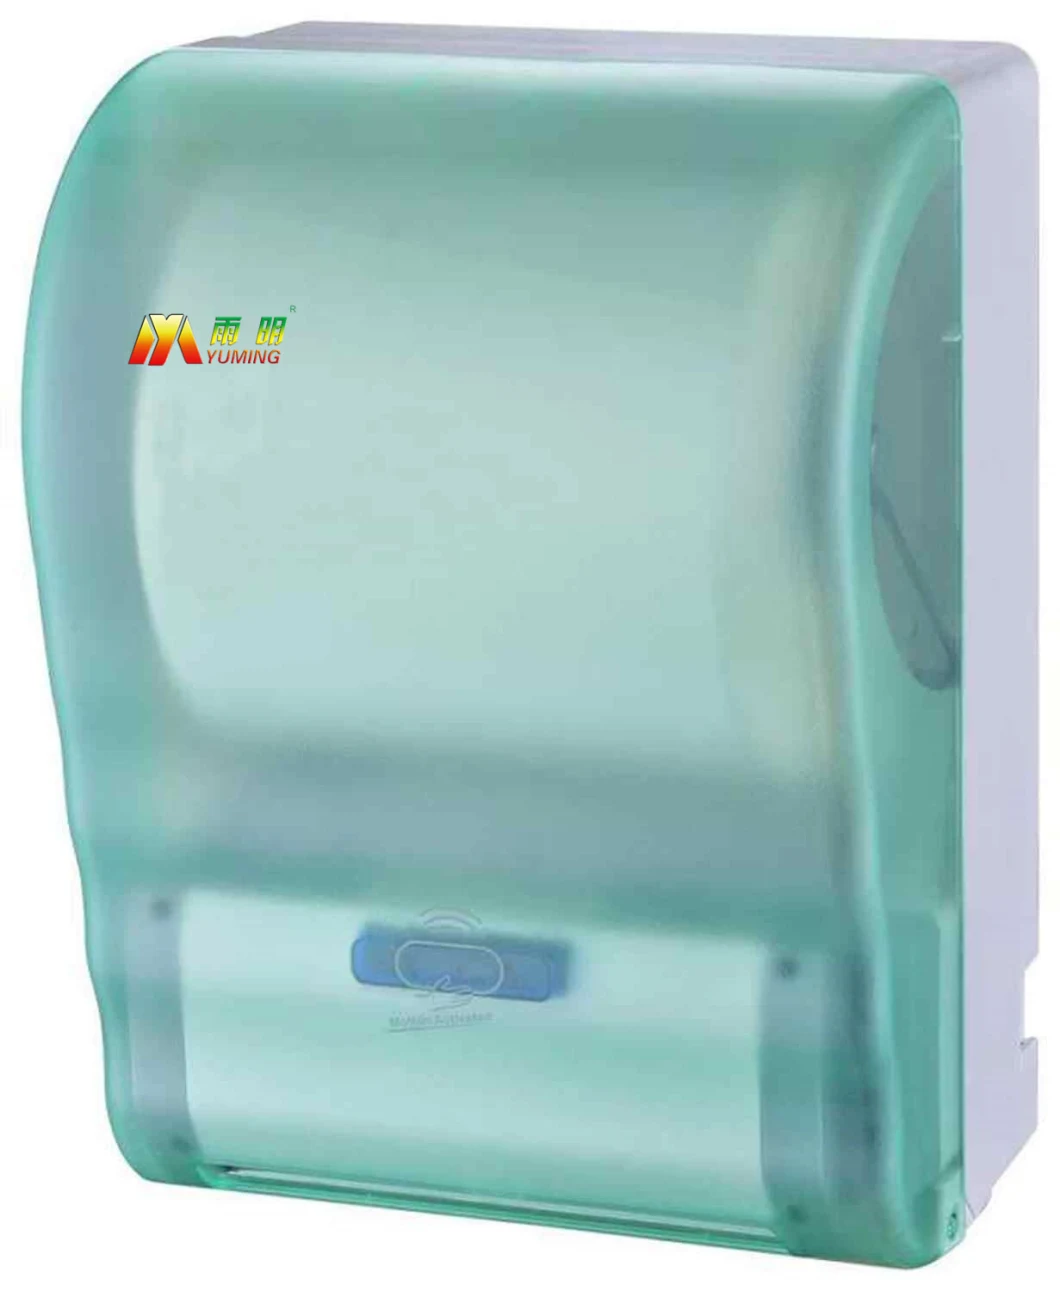 Plastic Products Commercial Automatic Cut Hand Roll Paper Dispenser for Hotel